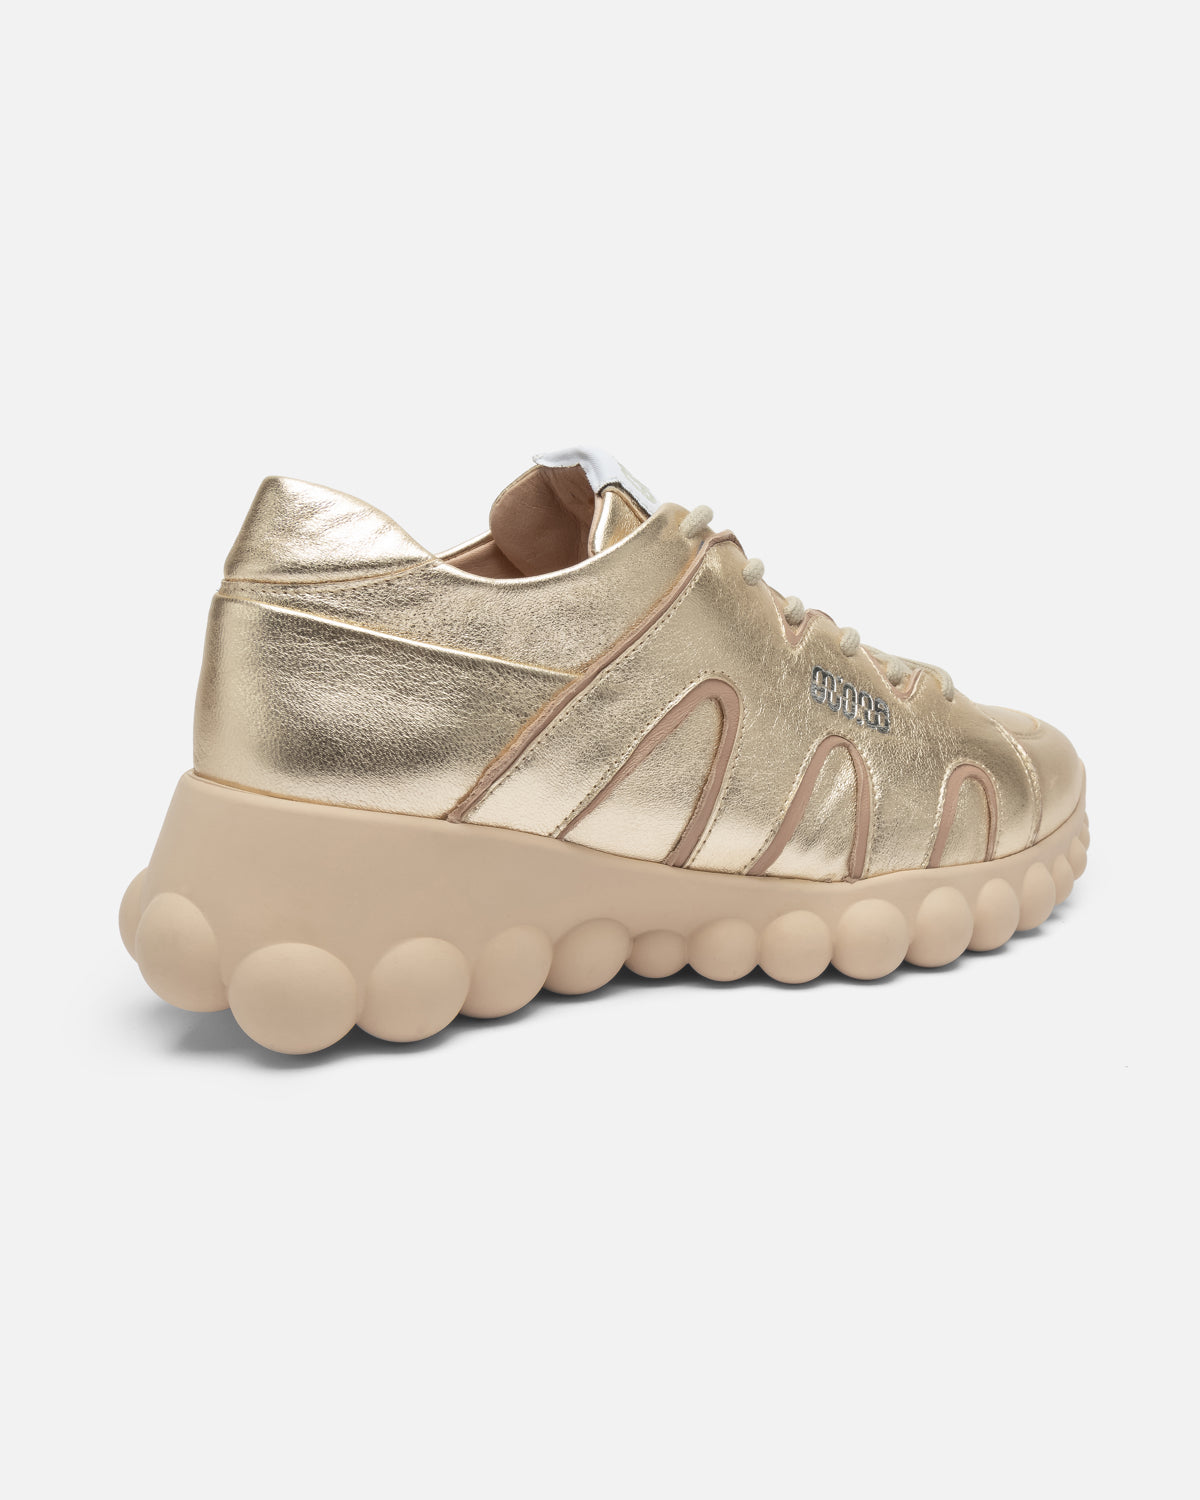 Chain Reaction Champagne Leather